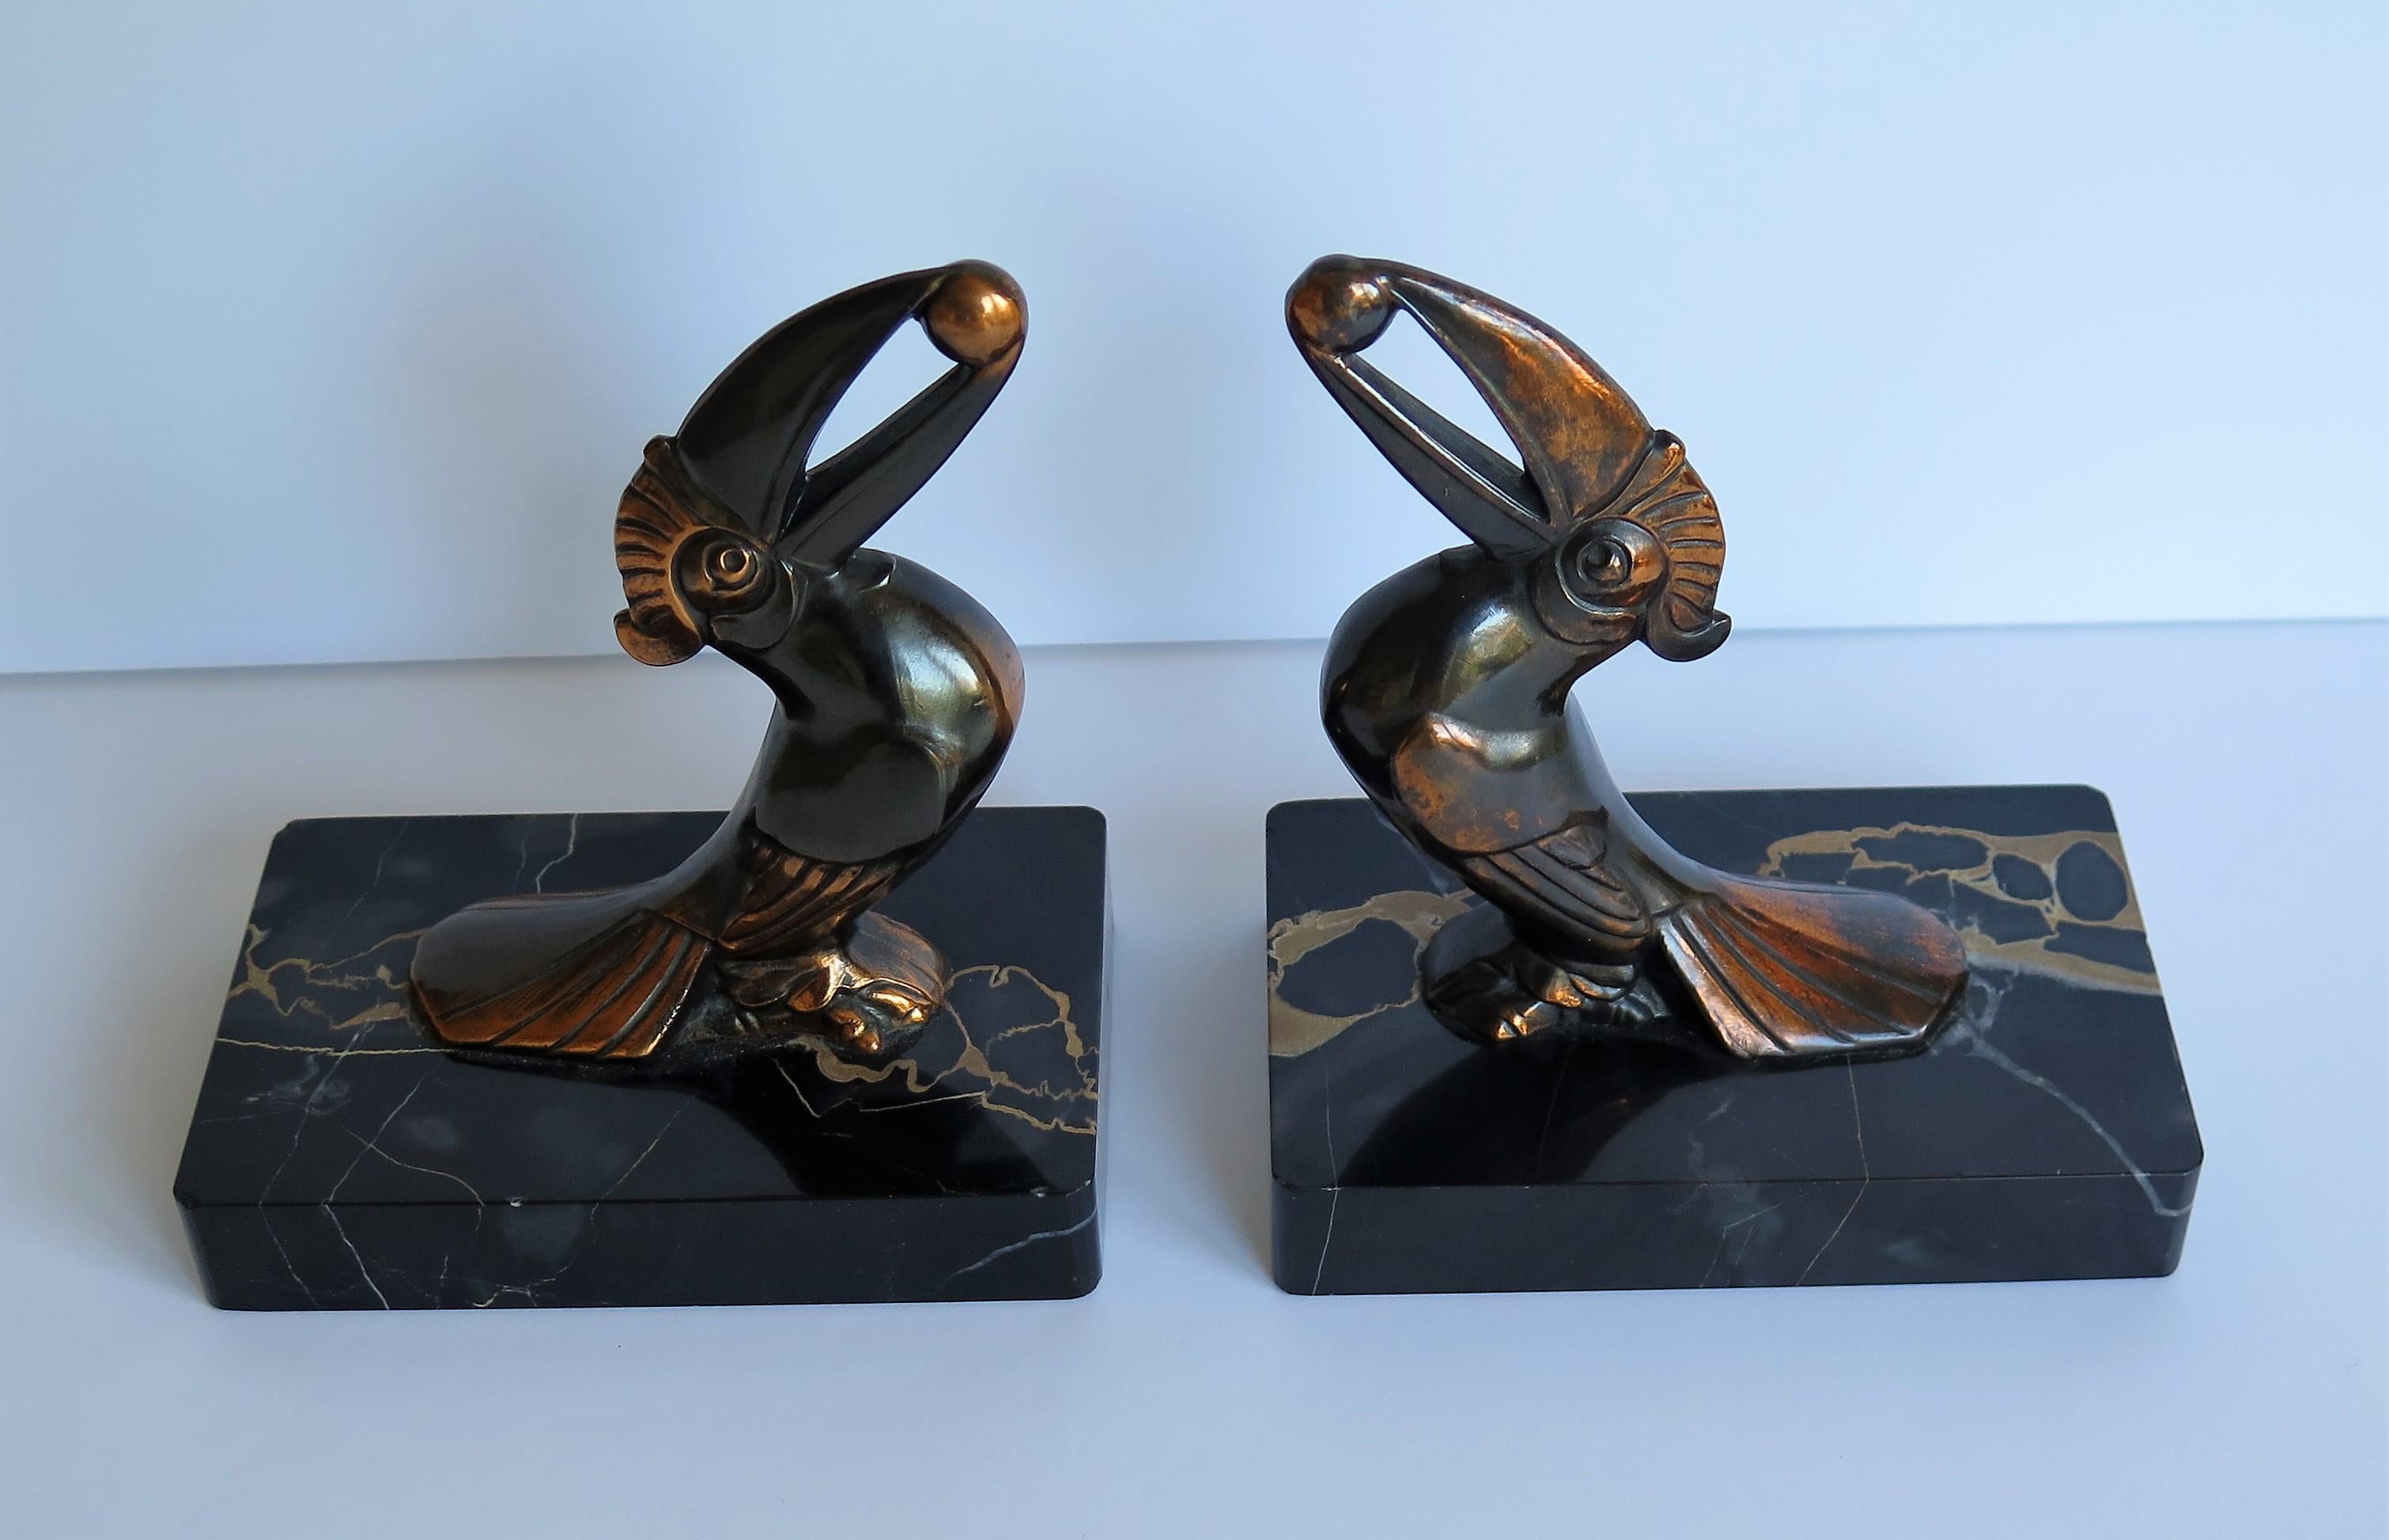 These are a beautiful pair of French, Art Deco period, Book Ends of two metal Toucans on Portoro Italian Marble bases. 

Each Toucan has been well modelled with good detail and holding a berry in its beak. They are made of metal having a bronzed -